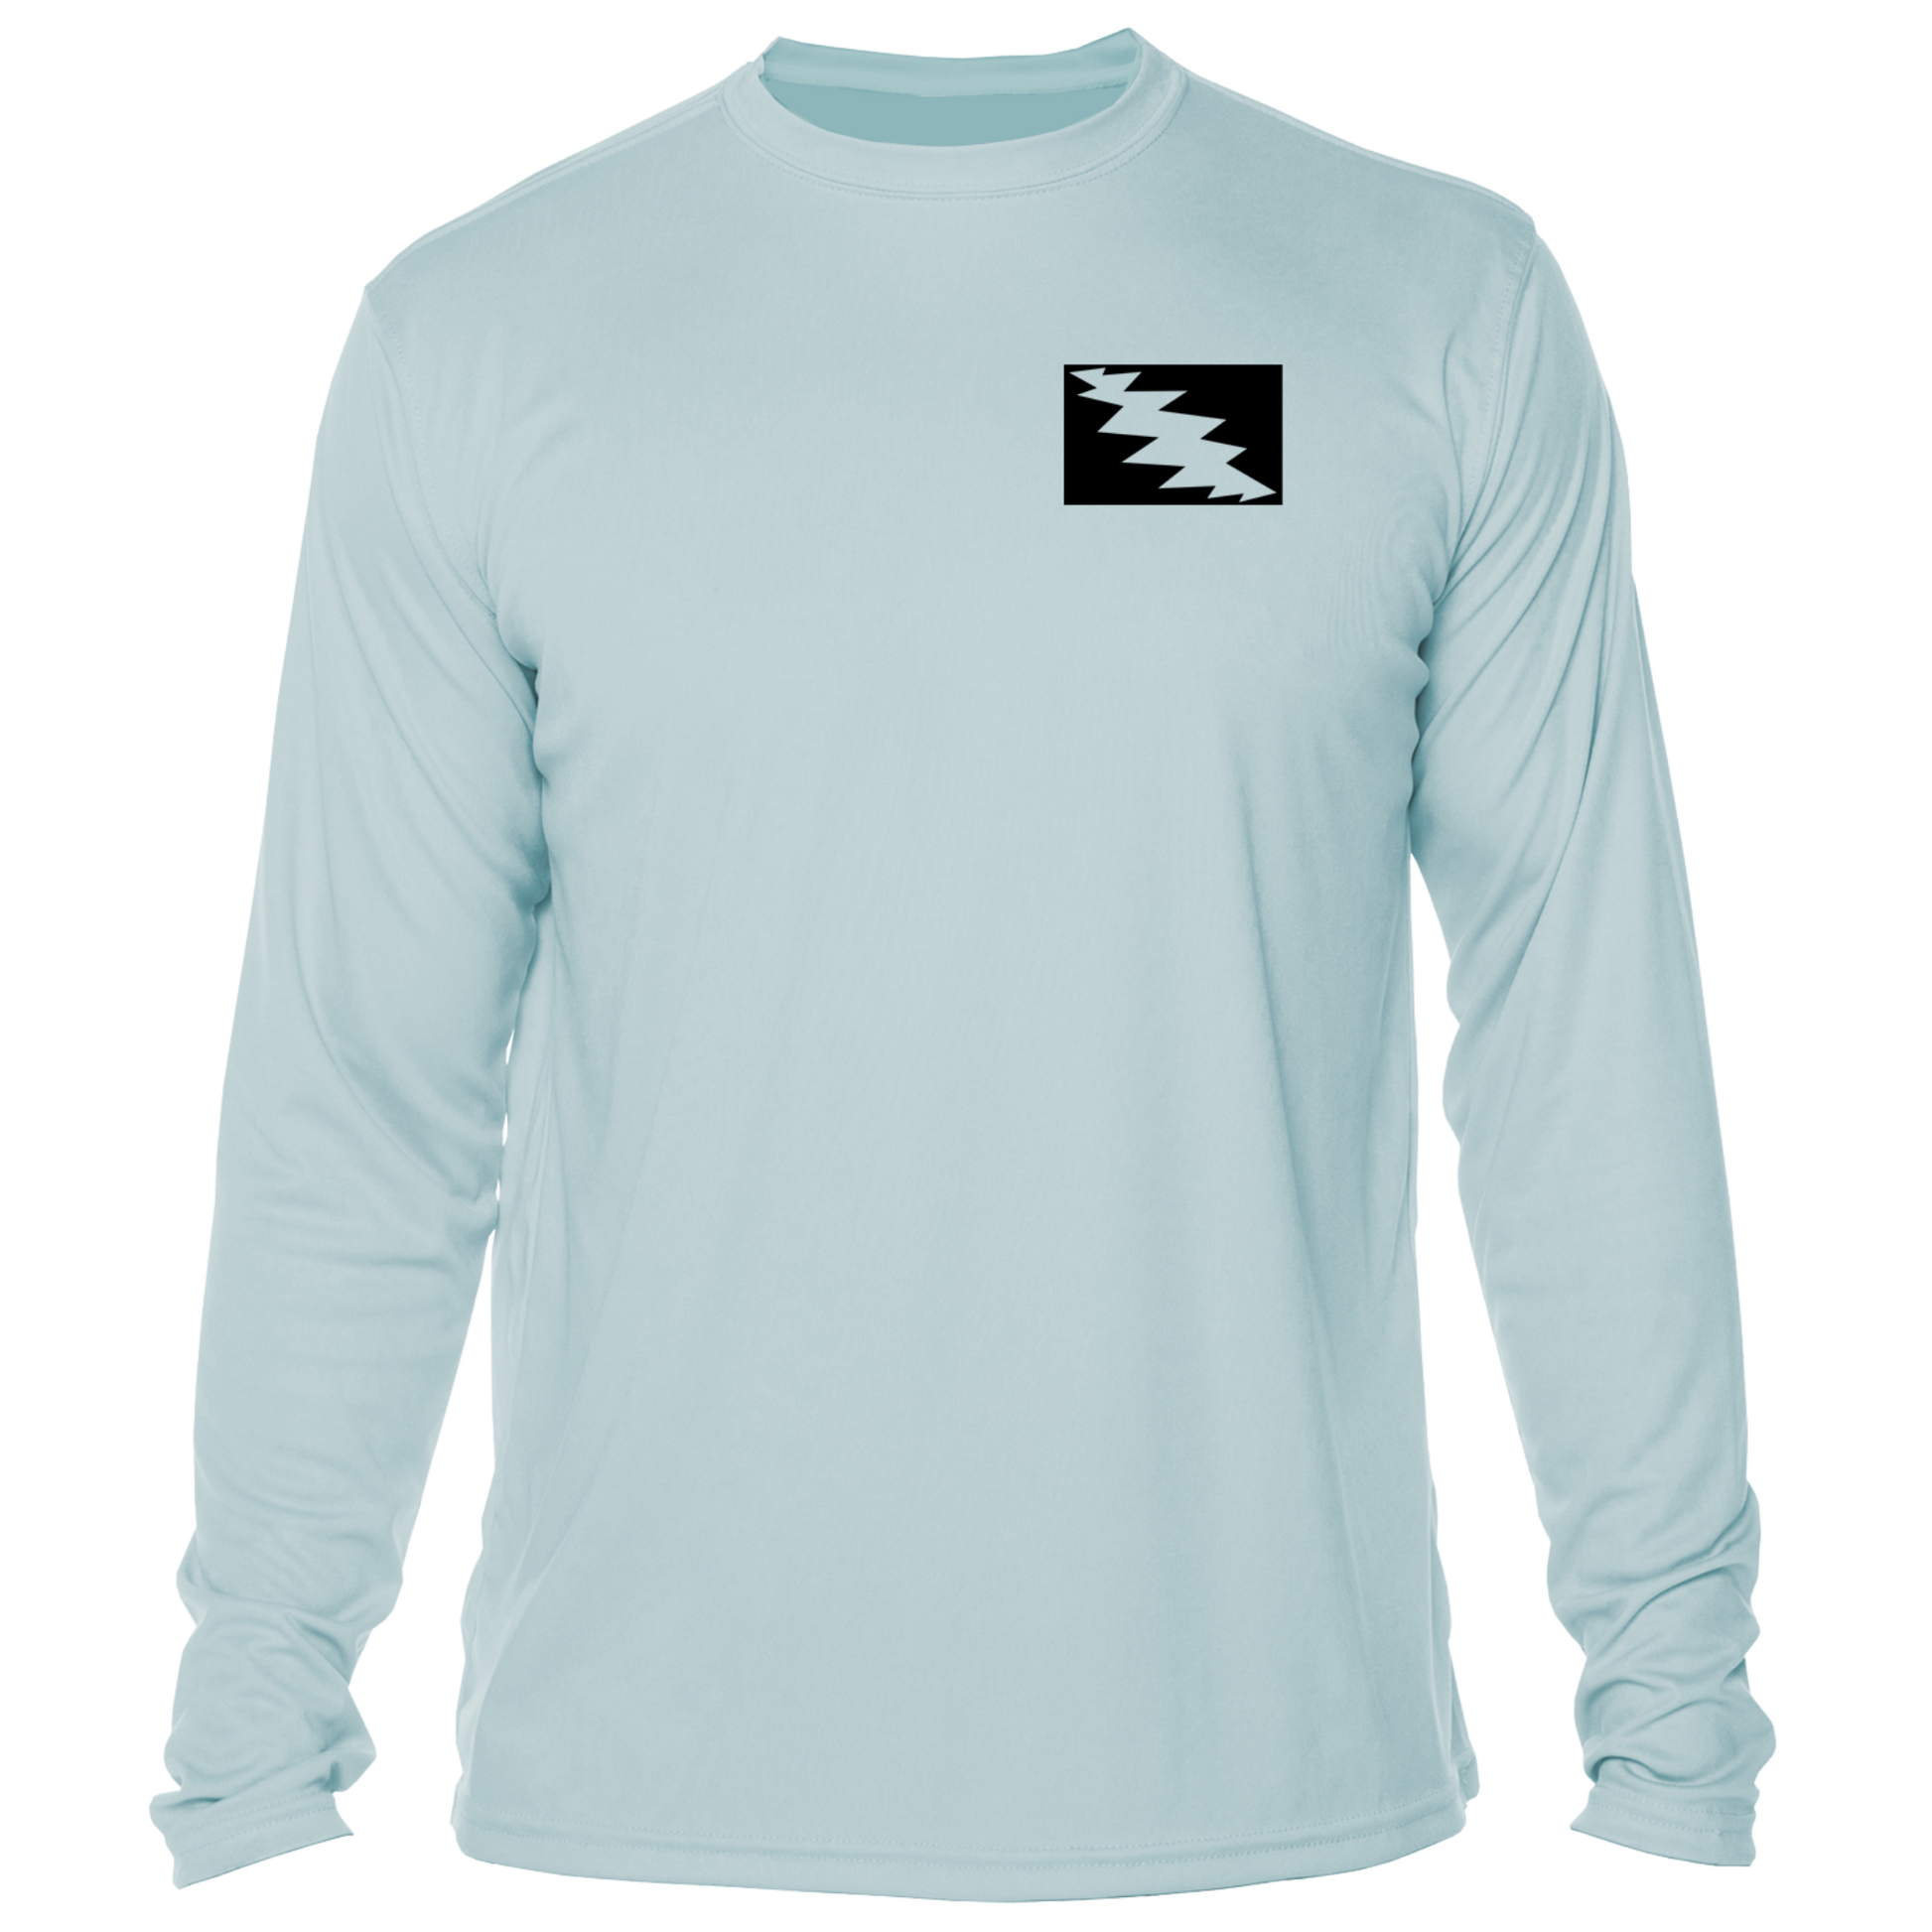 Grateful Diver Palm Tree UV Shirt in arctic blue showing the front off figure